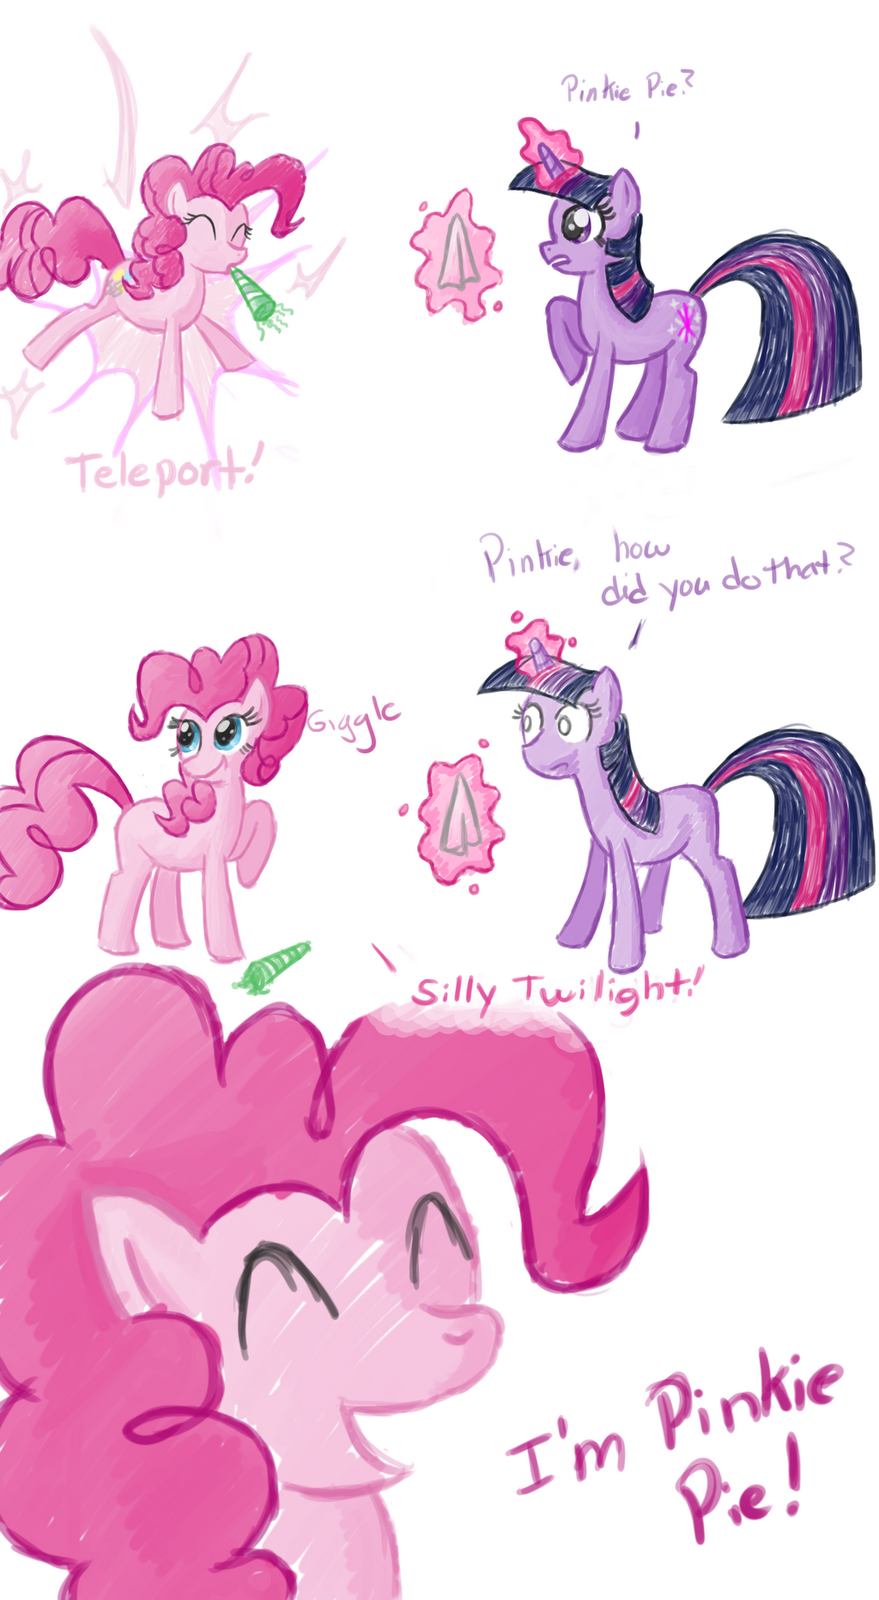 Funny pictures, videos and other media thread! - Page 6 99502+-+artist-feather+pinkie_pie+twilight_sparkle